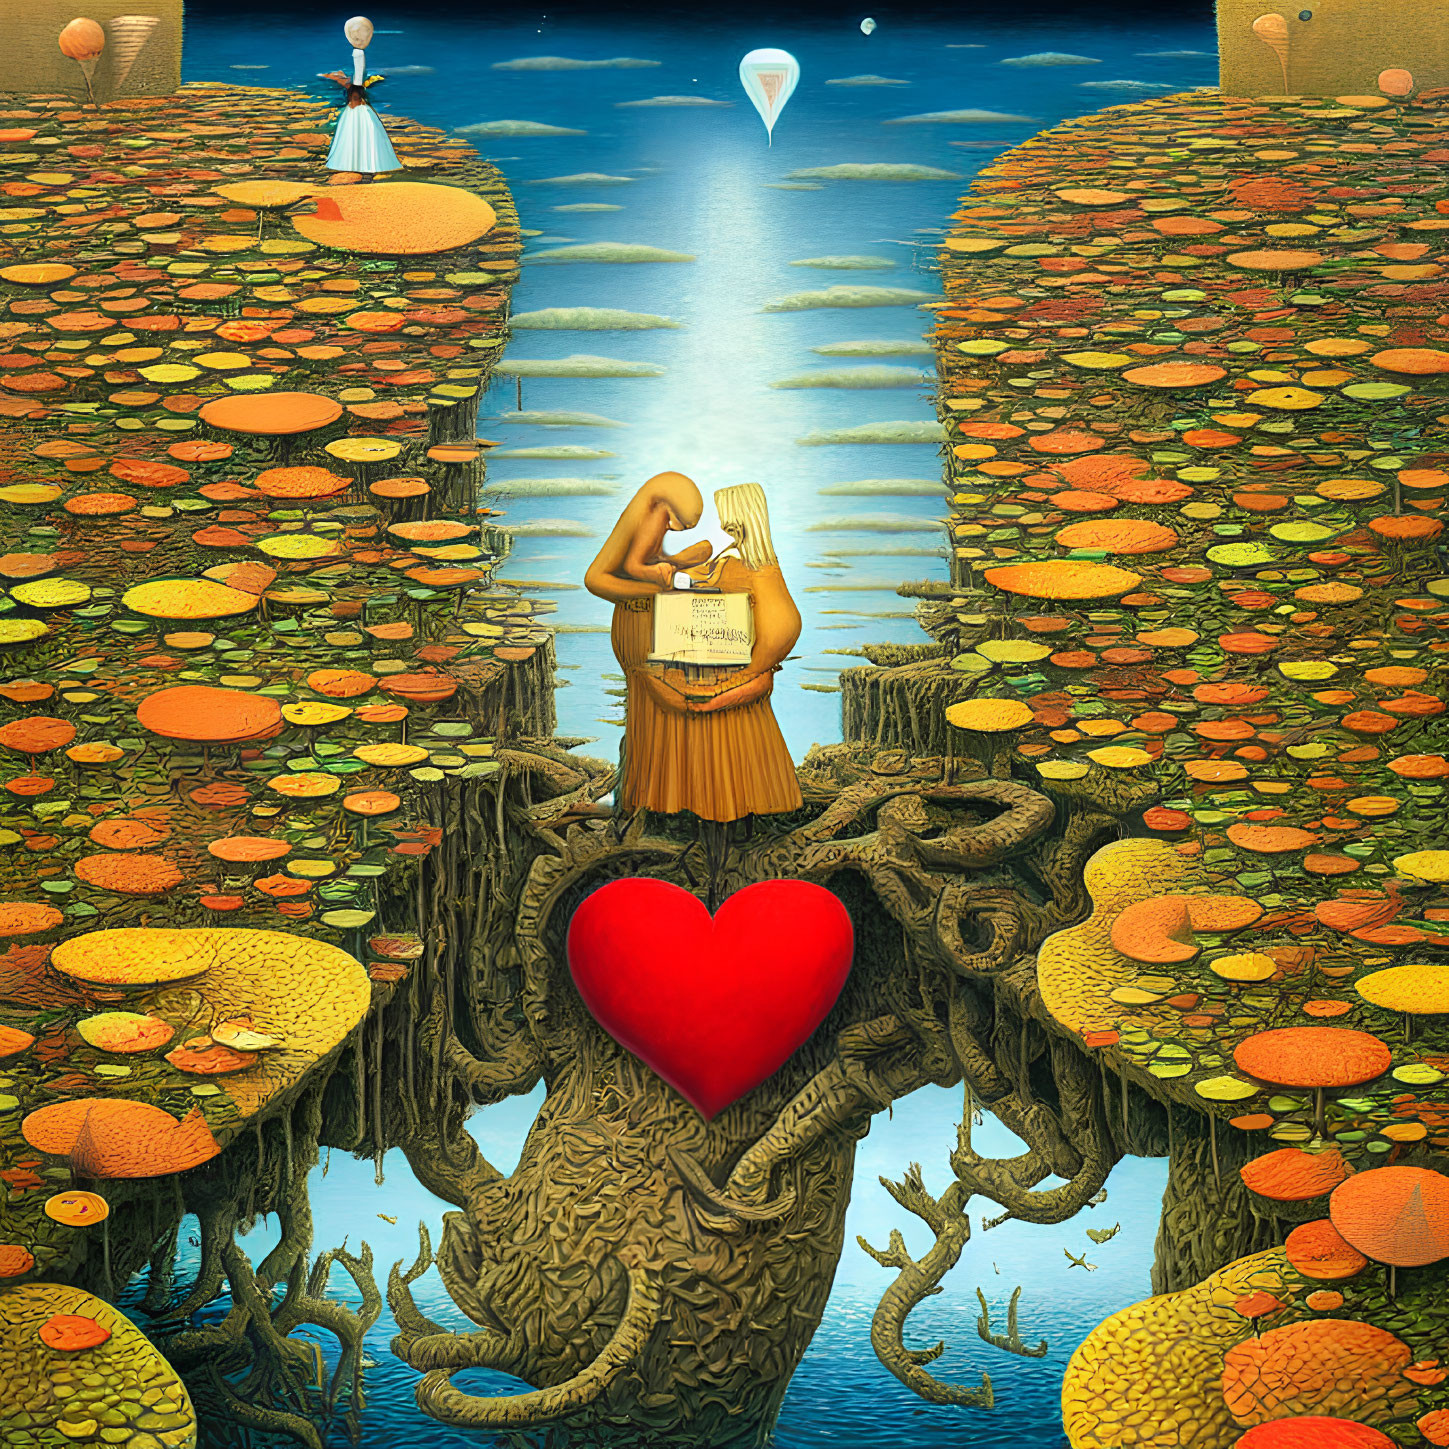 Surreal artwork: Heart-shaped tree, woman reading, lily pads, figures on cliffs